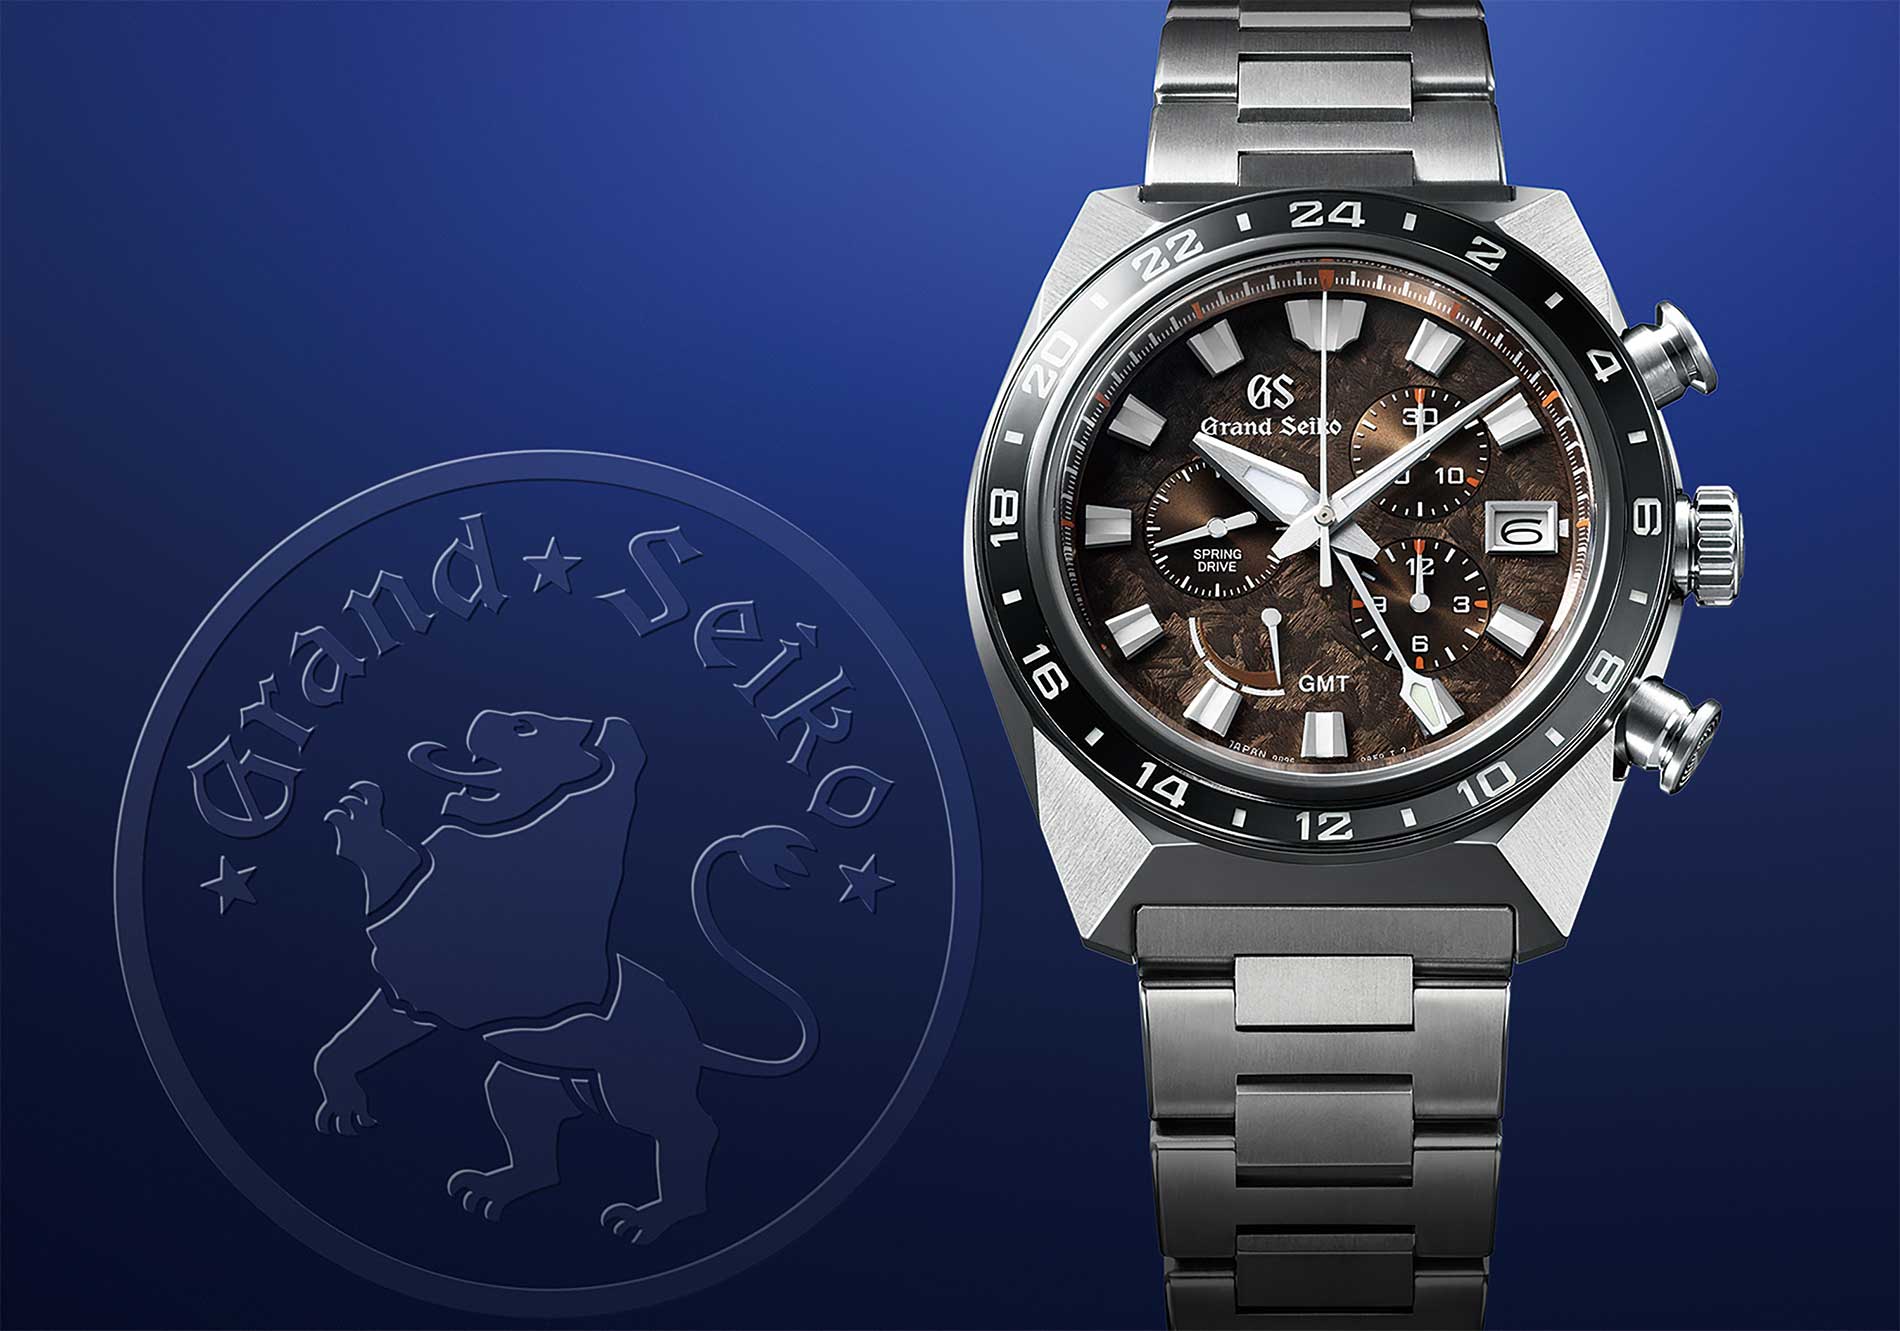 20 Years of Spring Drive are Celebrated in a New Grand Seiko Sport Design The Grand Seiko Lion Bares its Claws